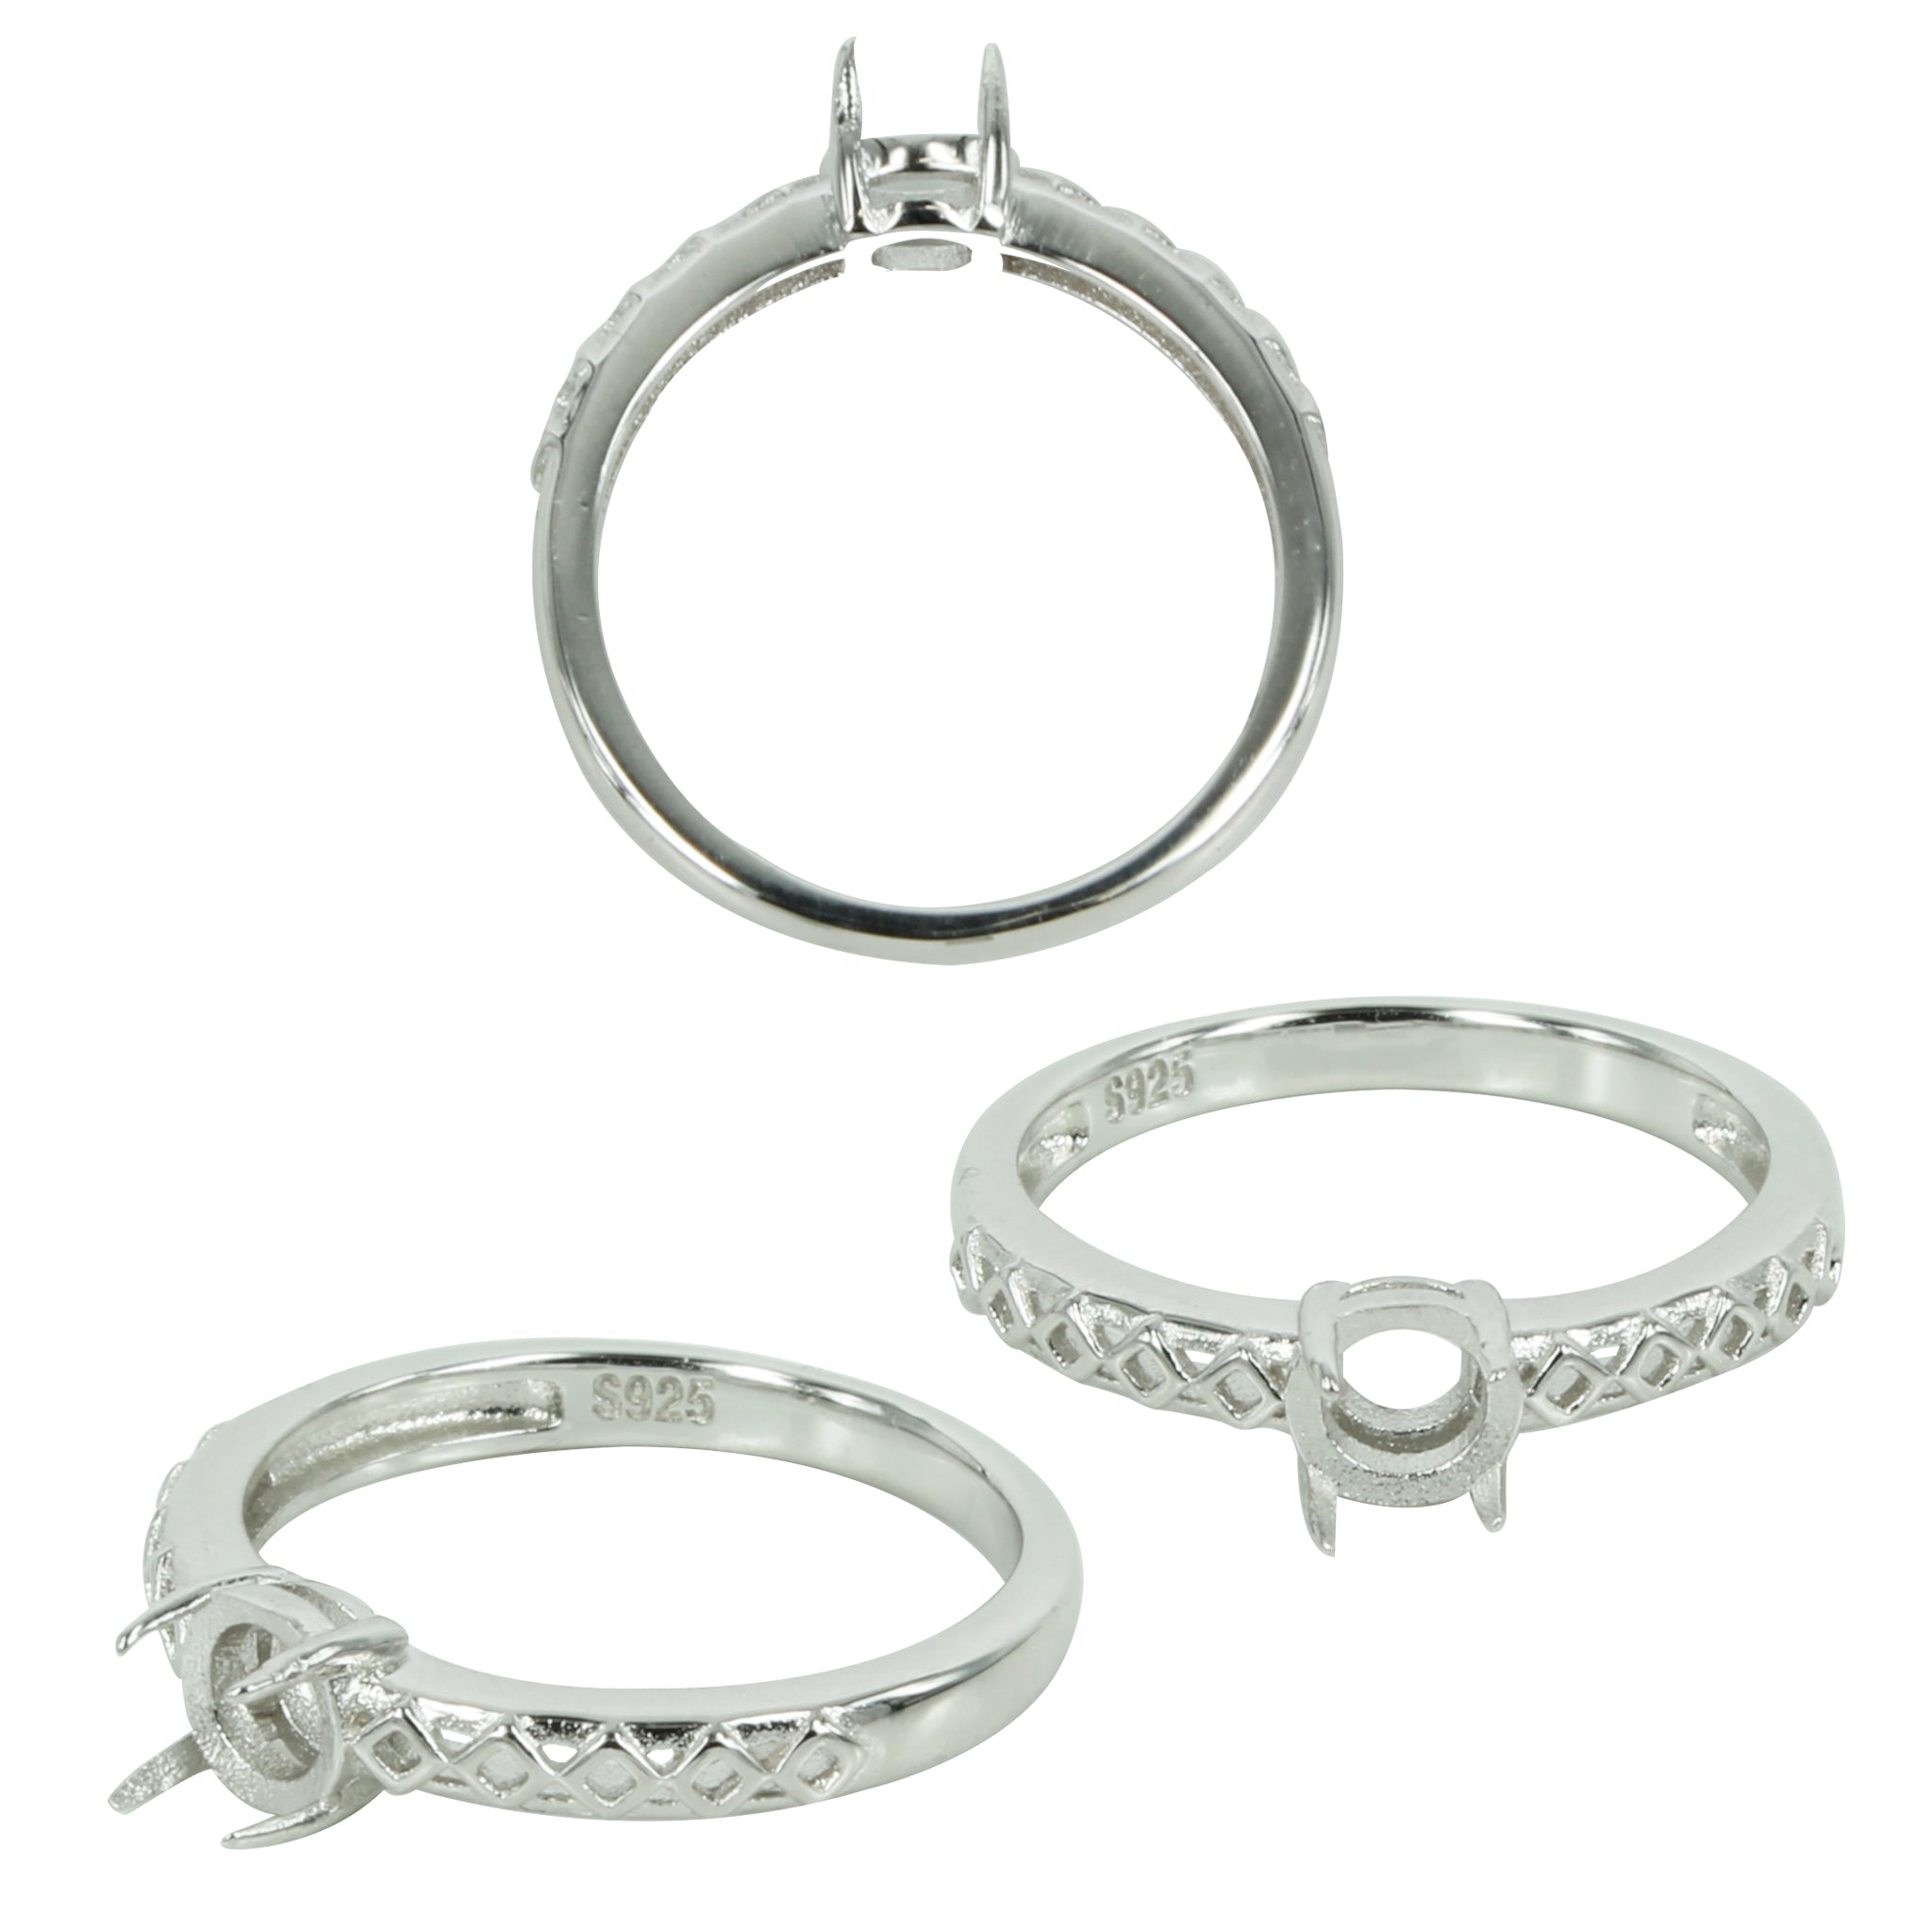 Harlequin Shoulders Ring in Sterling Silver for 4mm Round Stones